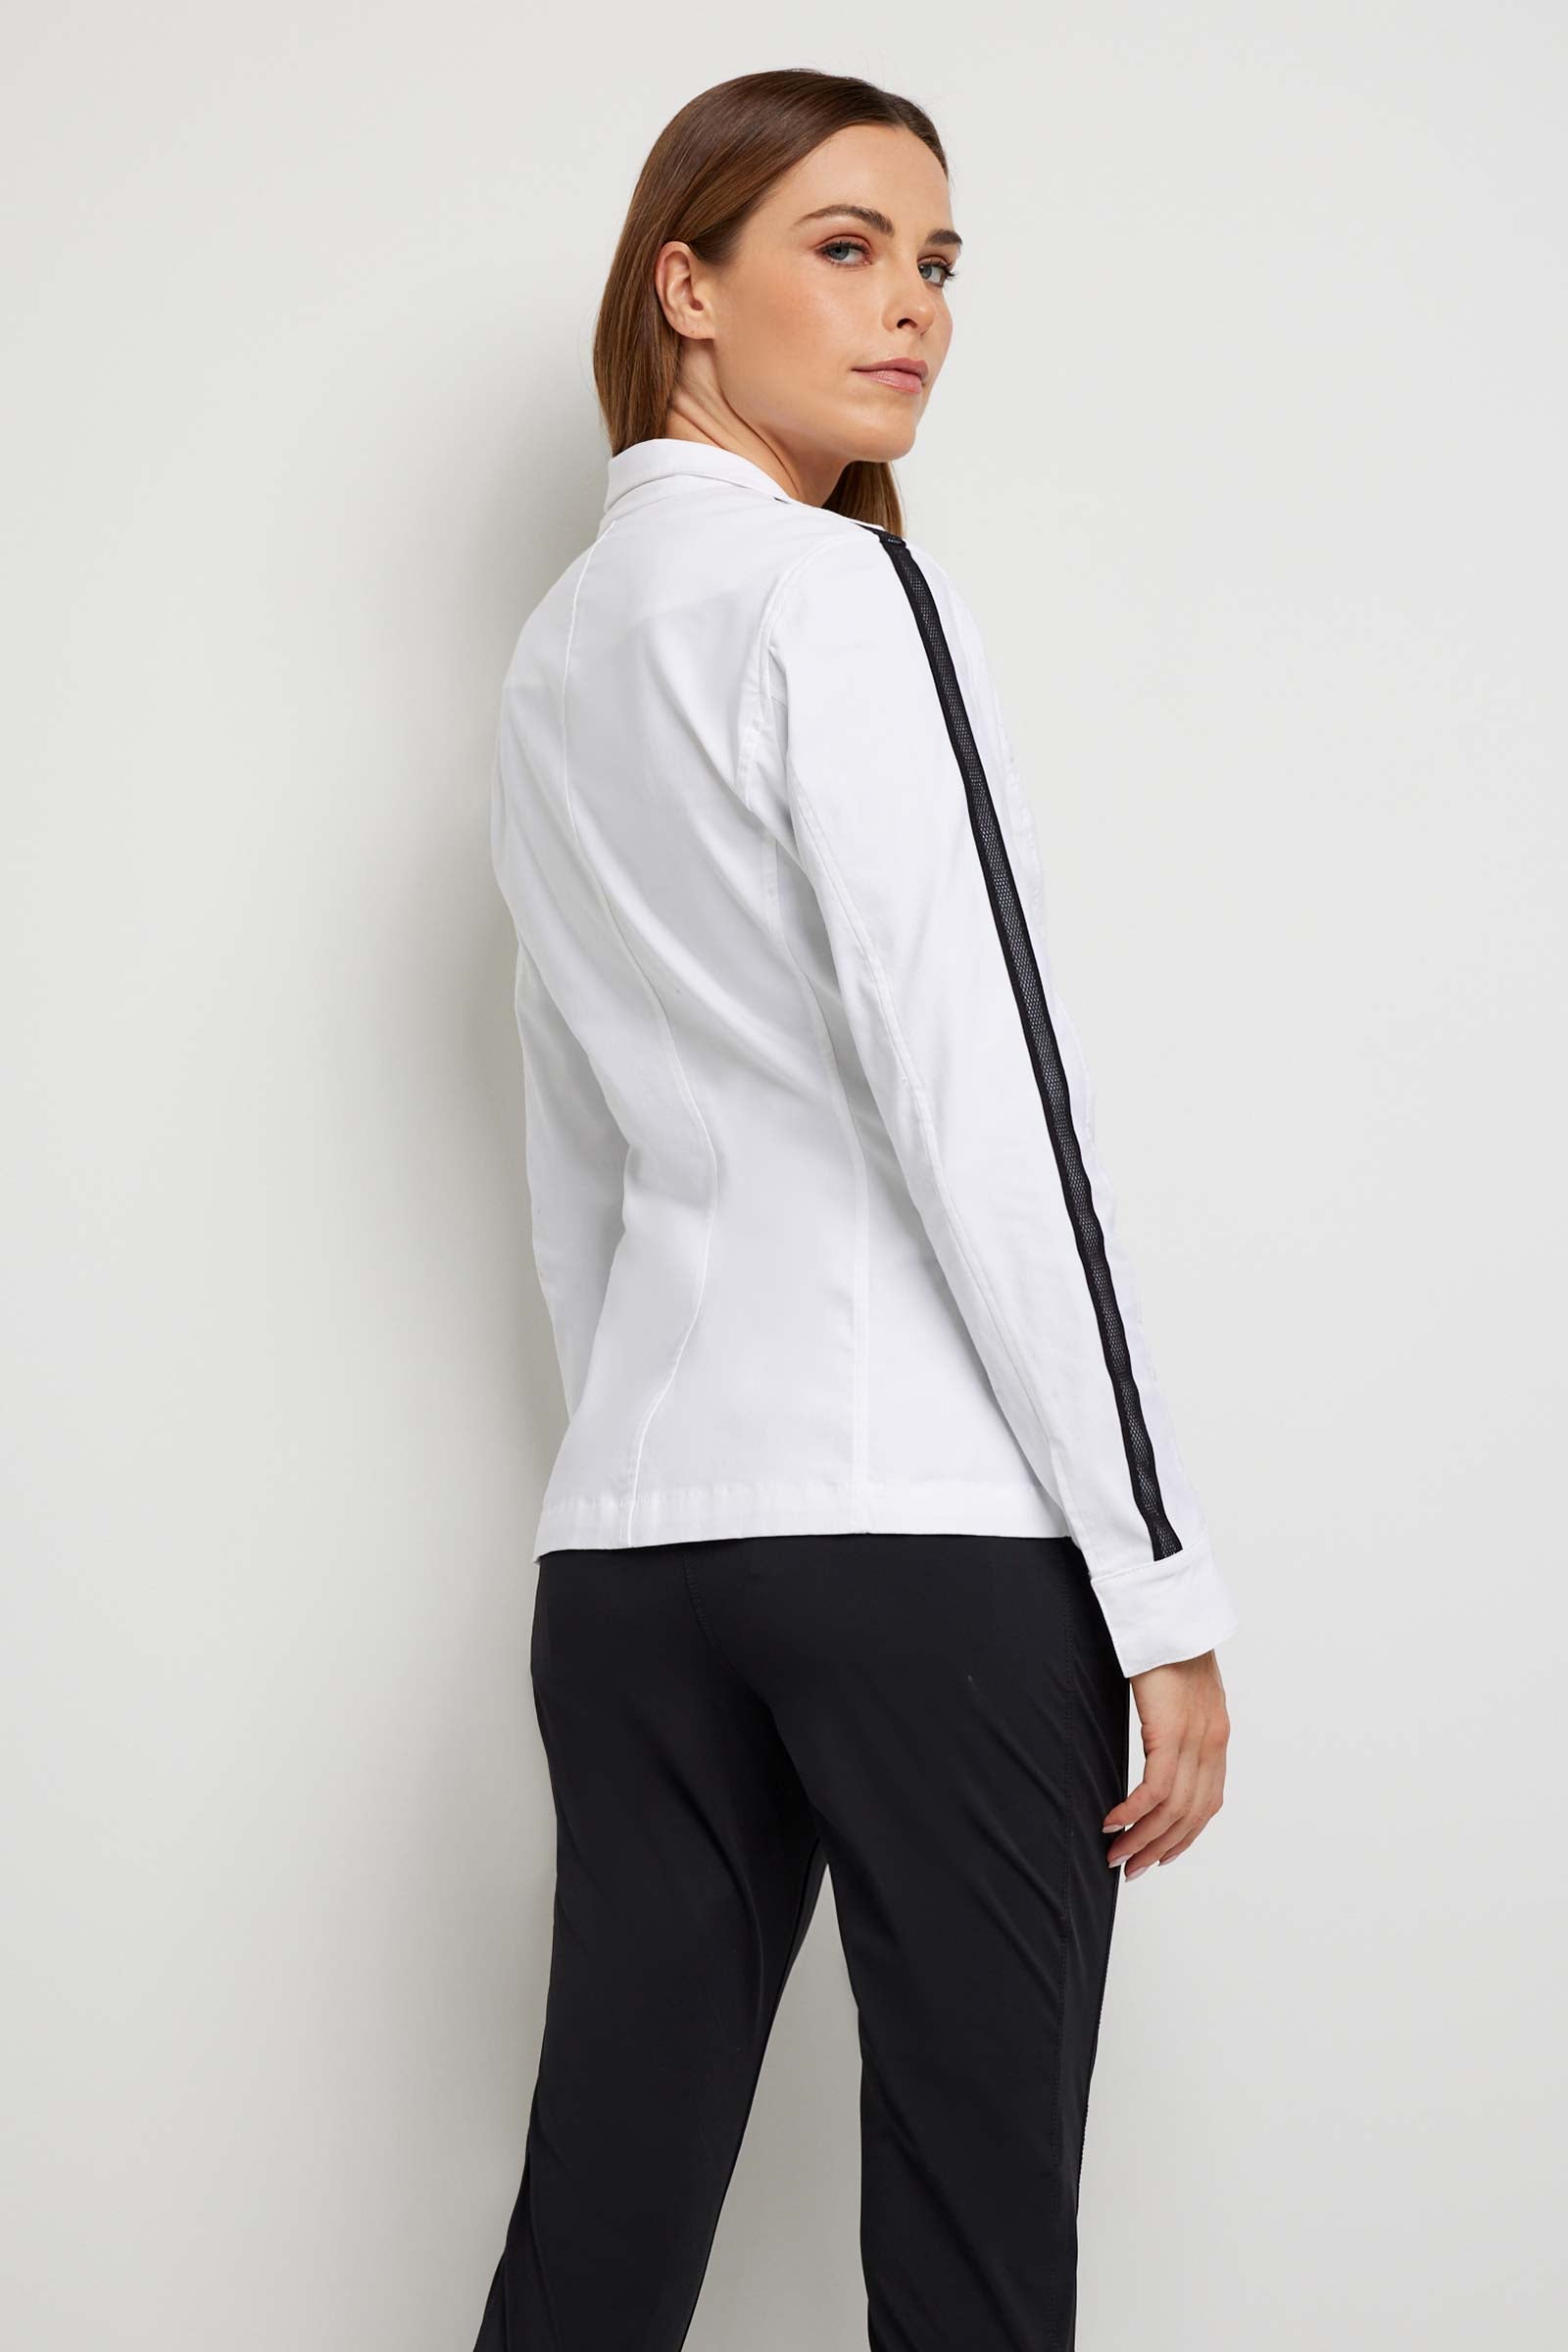 The Best Travel Jacket. Woman Showing the Back Profile of a Justine Jacket in White.